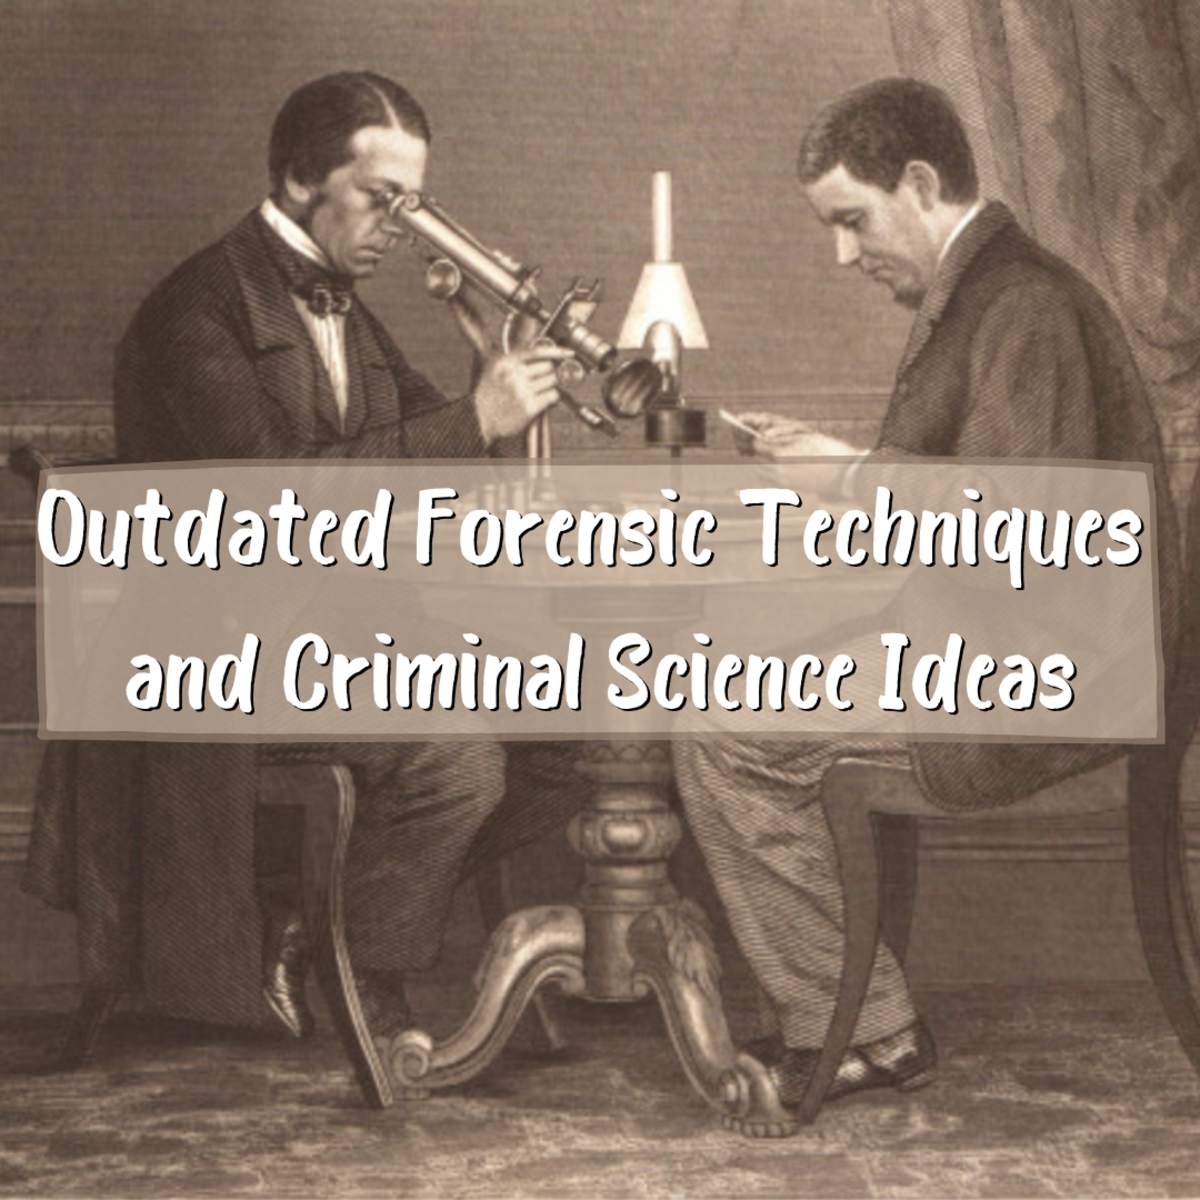 The Victorian era marked a great spurt in the growth of criminal forensics. Read on to learn about some of the misconceptions and outlandishness that plagued the field's growth. Such scientific progress is often marked by mistakes.